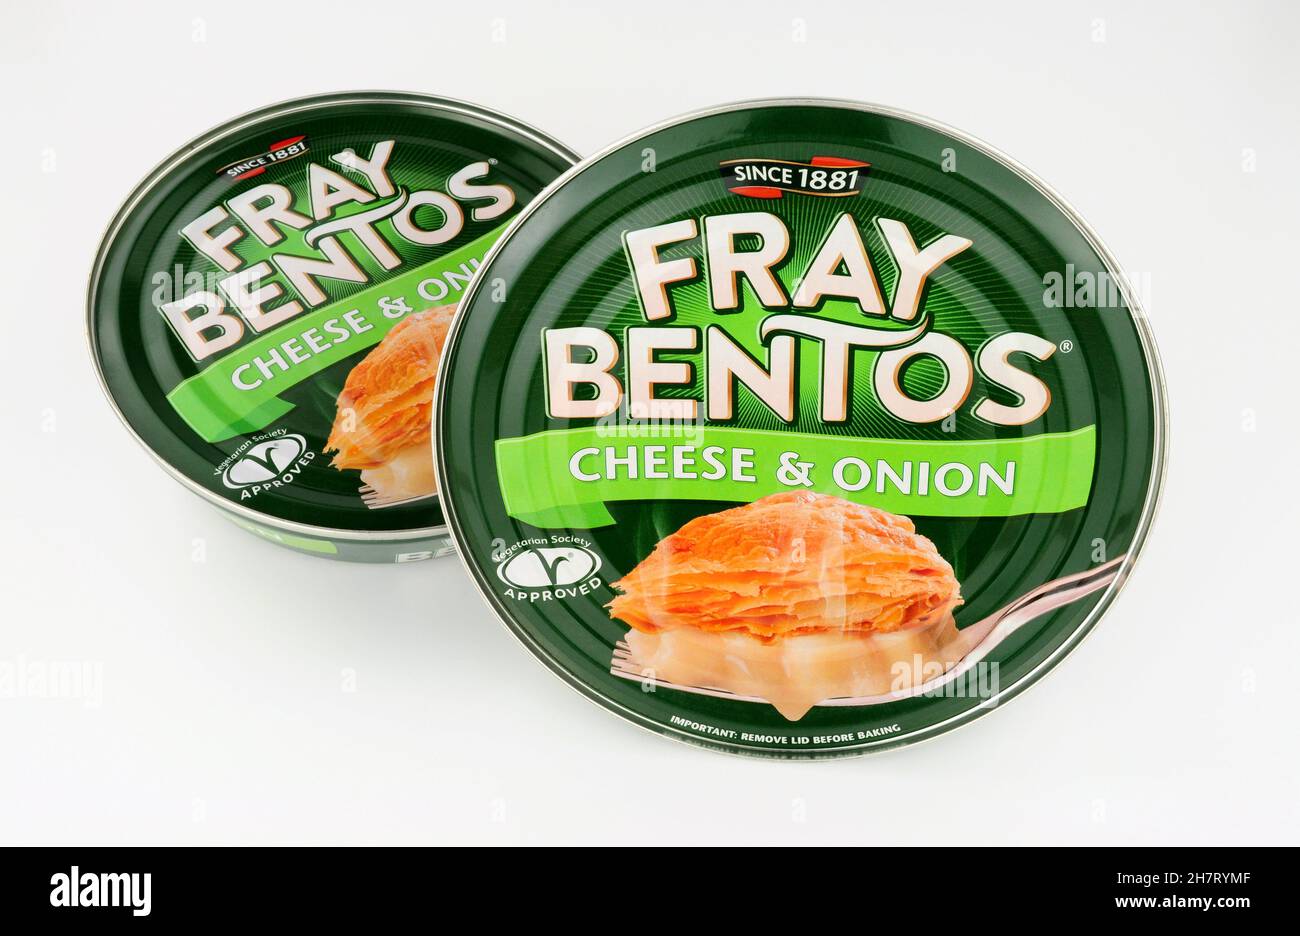 Fray Bentos Posters for Sale